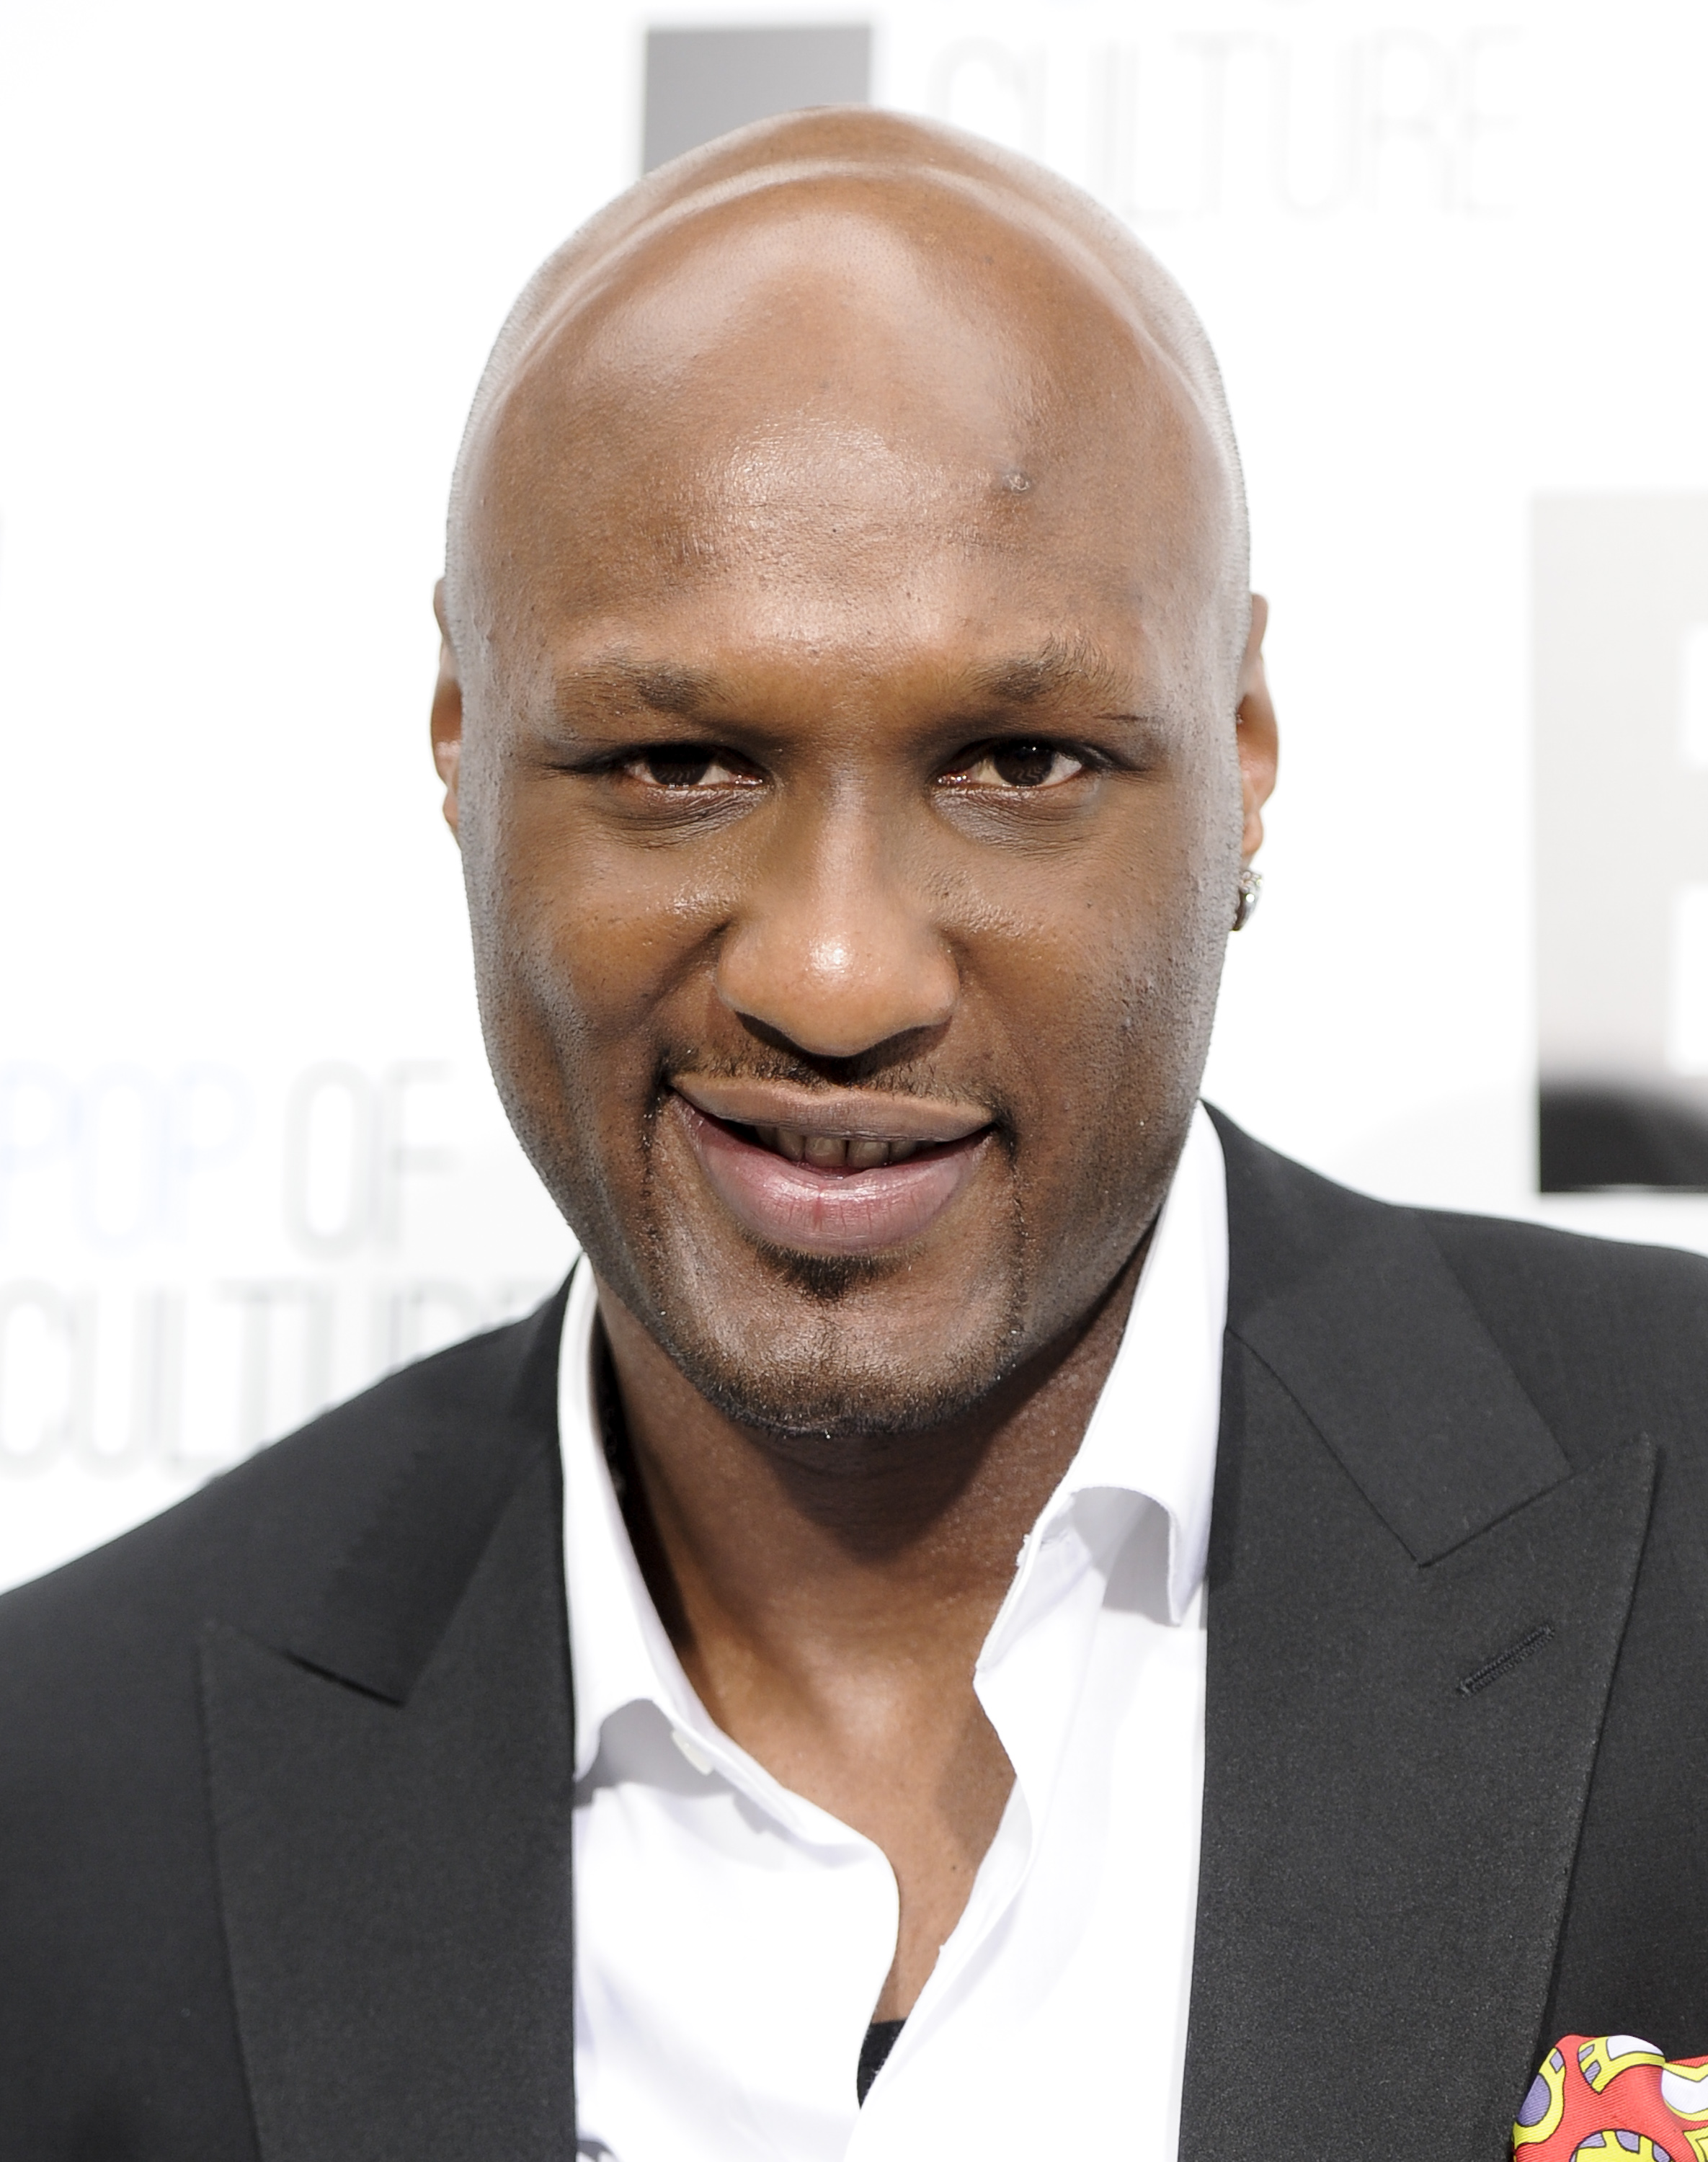 Lamar Odom’s Life "Will Never Be the Same" Power 98.3 & 96.1